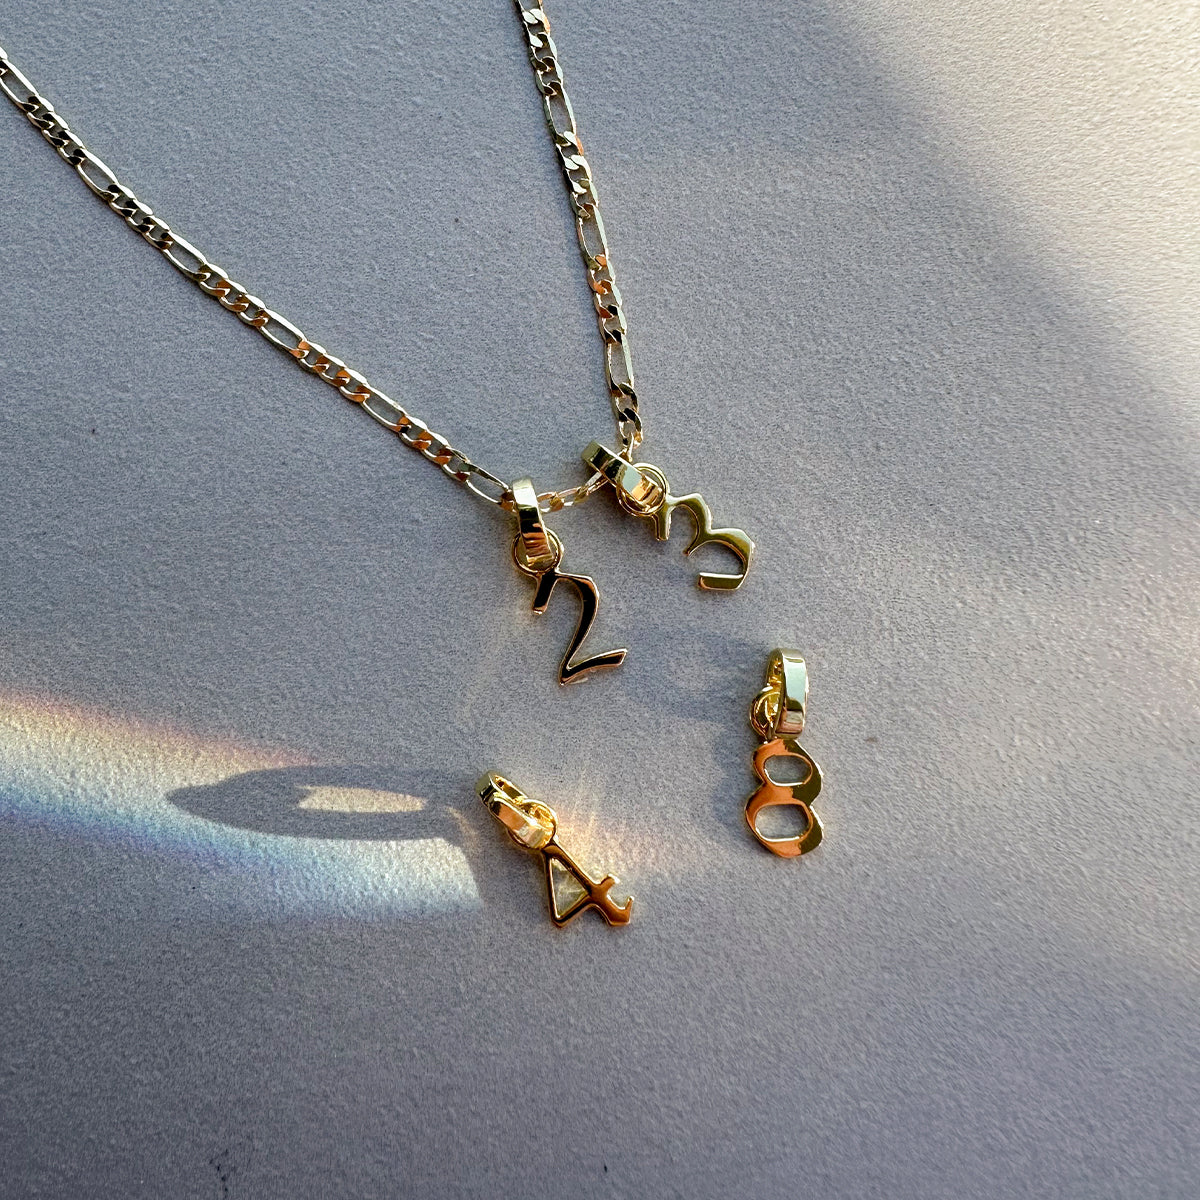 Number Charm | Gold 0 Gold 1 Gold 2 Gold 3 Gold 4 Gold 5 Gold 6 Gold 7 Gold 8 Gold 9  | Lifestyle Image | Uncommon James